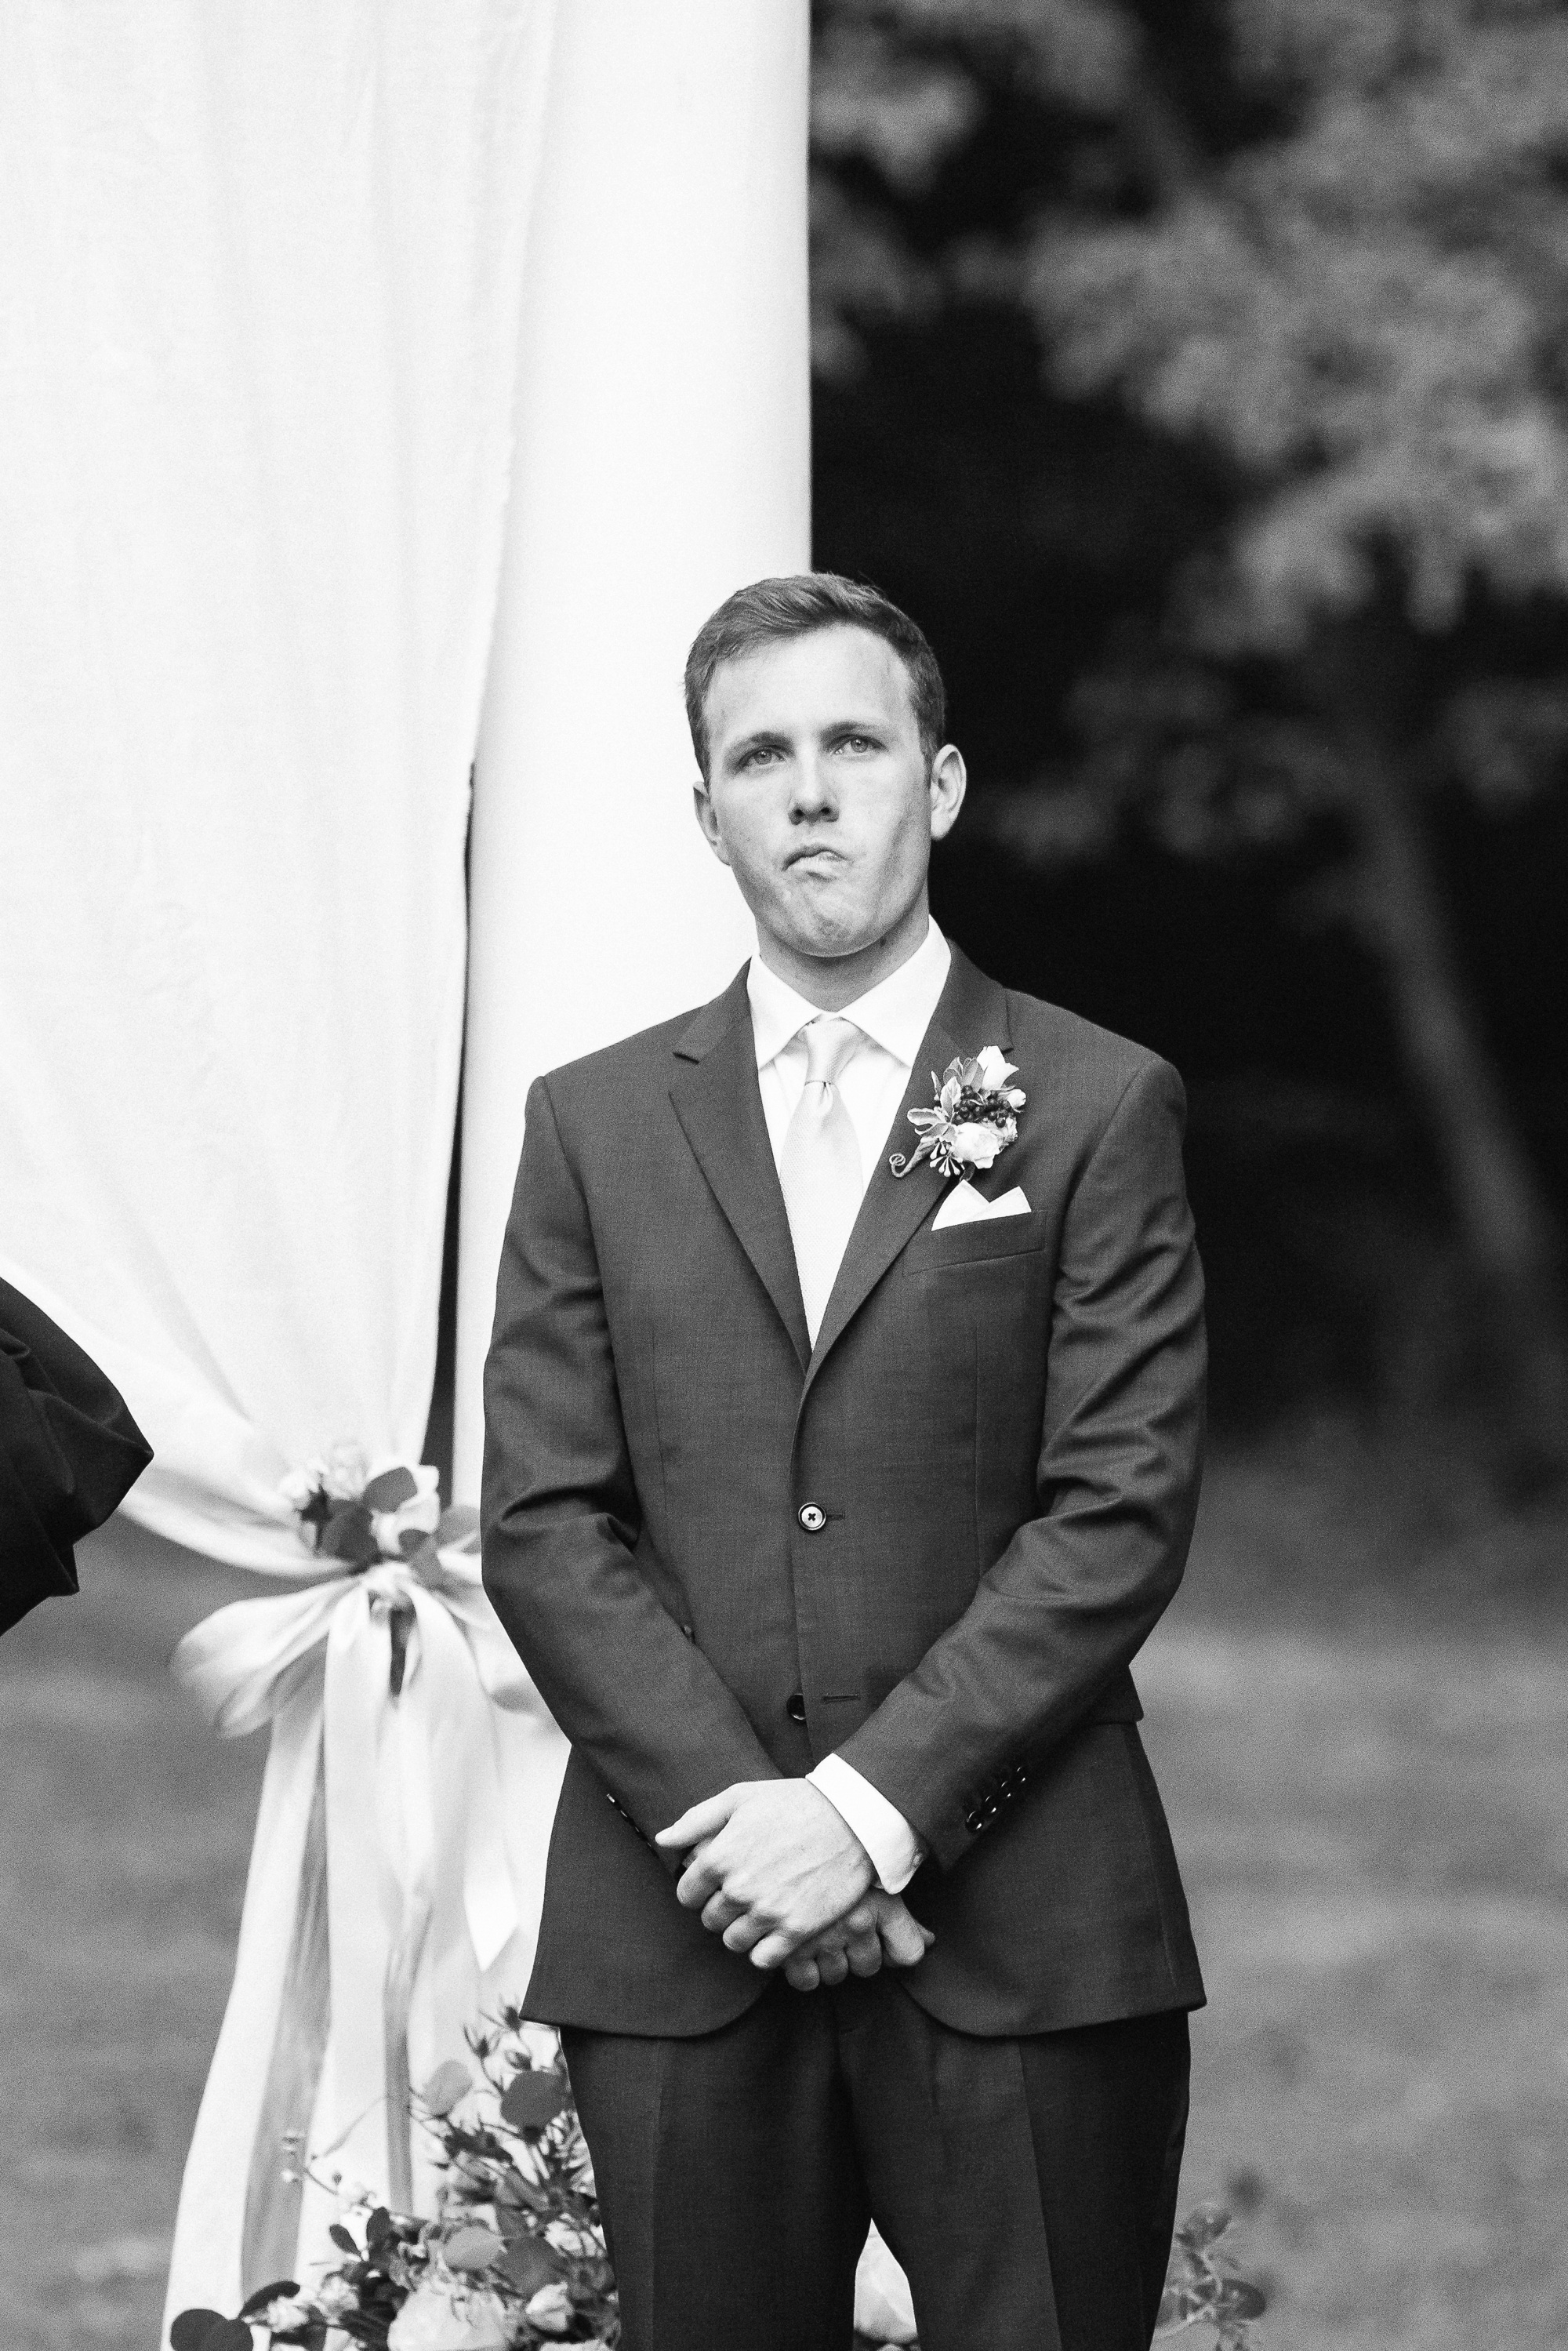 Sean fights tears as the moment his bride enters his view.